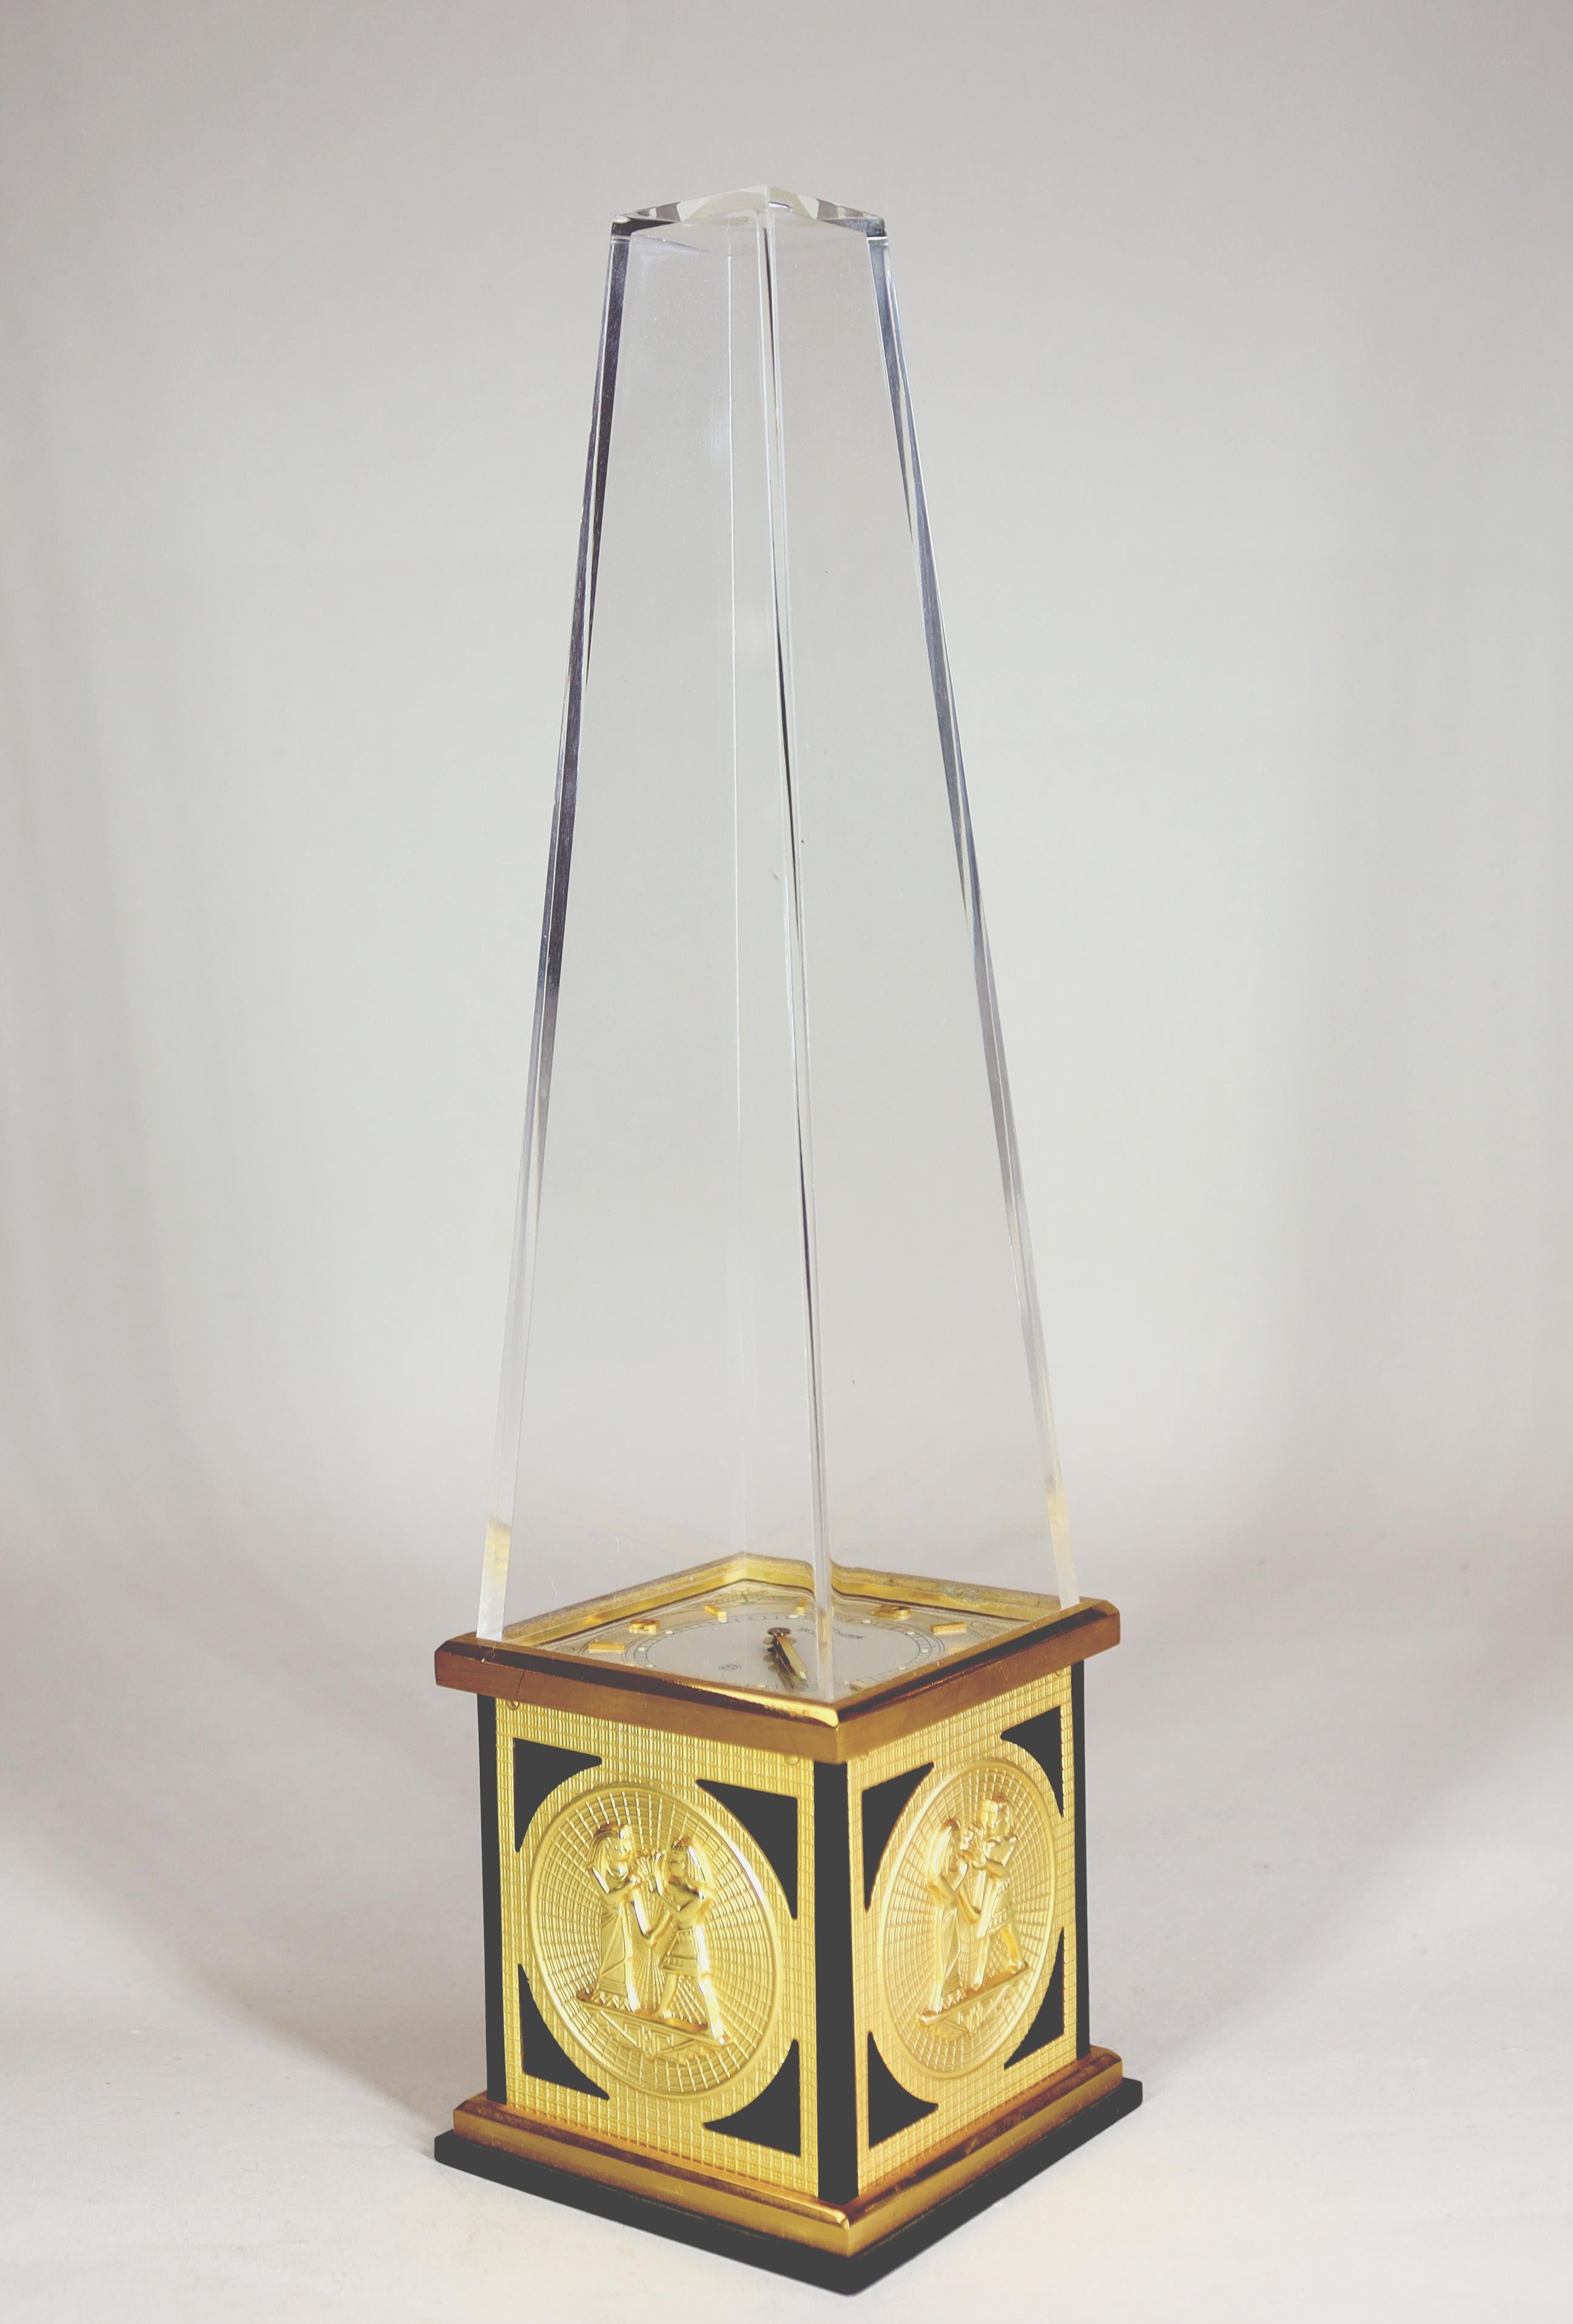 Egyptian Revival A Novelty Desk Clock By Jaeger LeCoultre For Sale